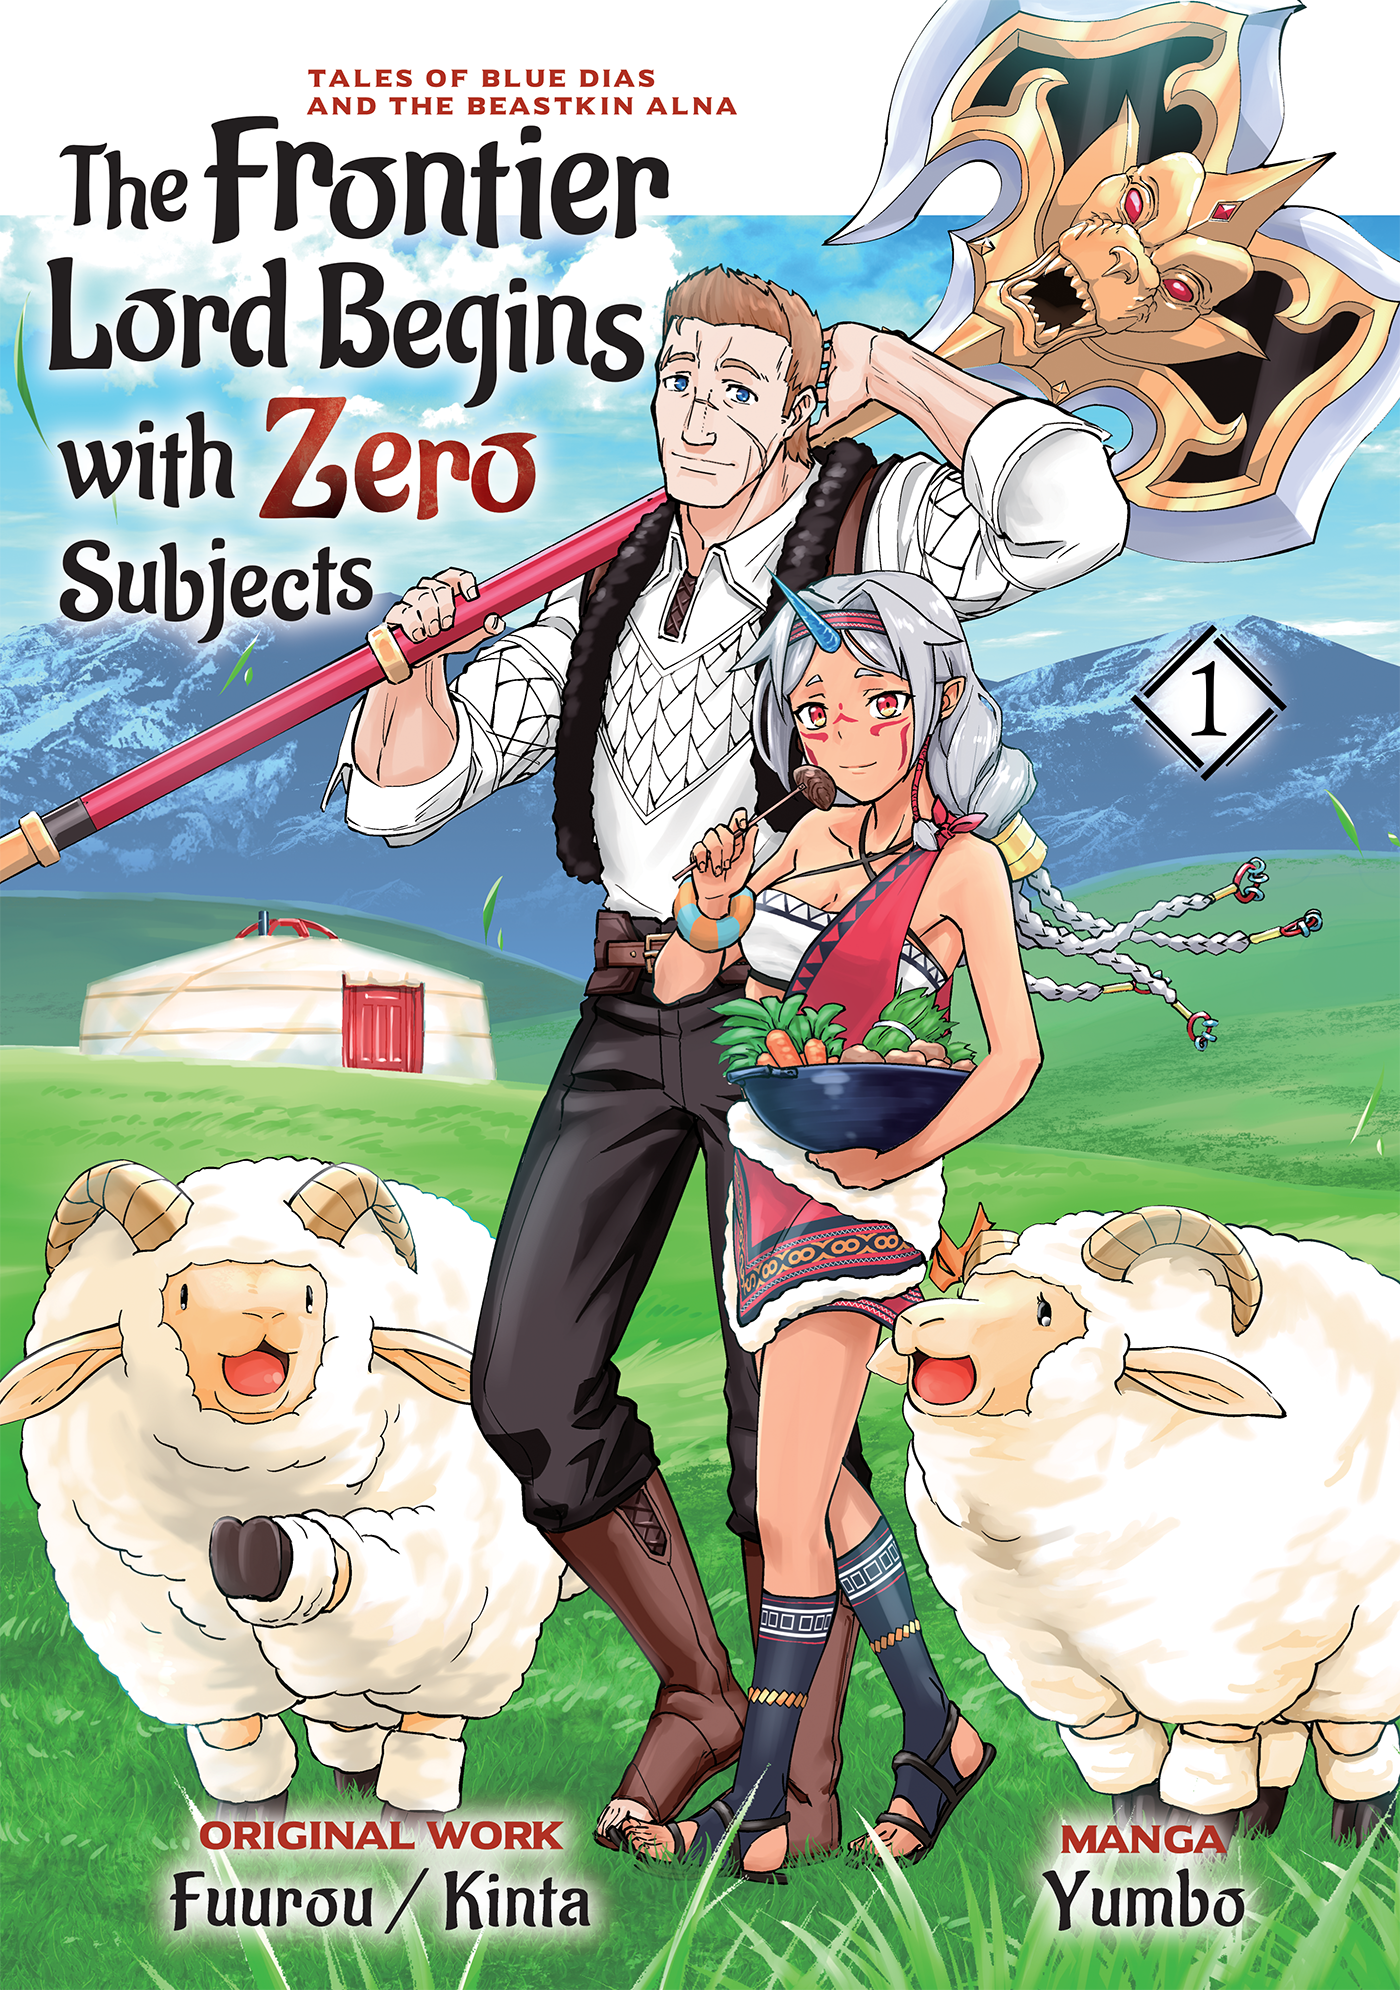 The Frontier Lord Begins with Zero Subjects: Tales of Blue Dias and the Beastkin Alna (Manga) by Yumbo (Art), Fuurou (Story), Kinta (Character Designs)